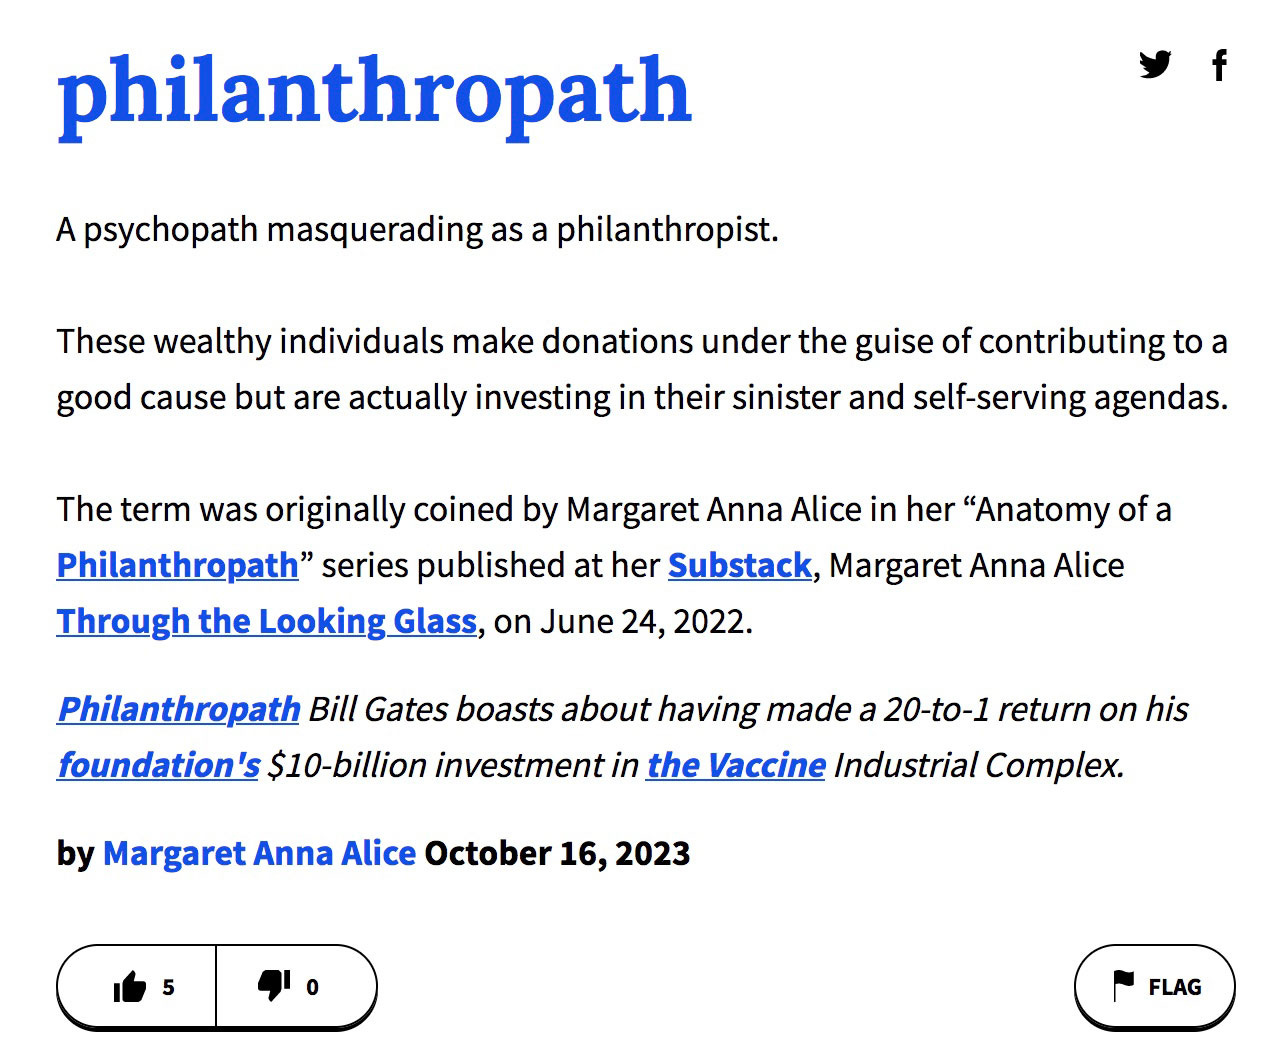 Urban Dictionary Entry for "Philanthropath"